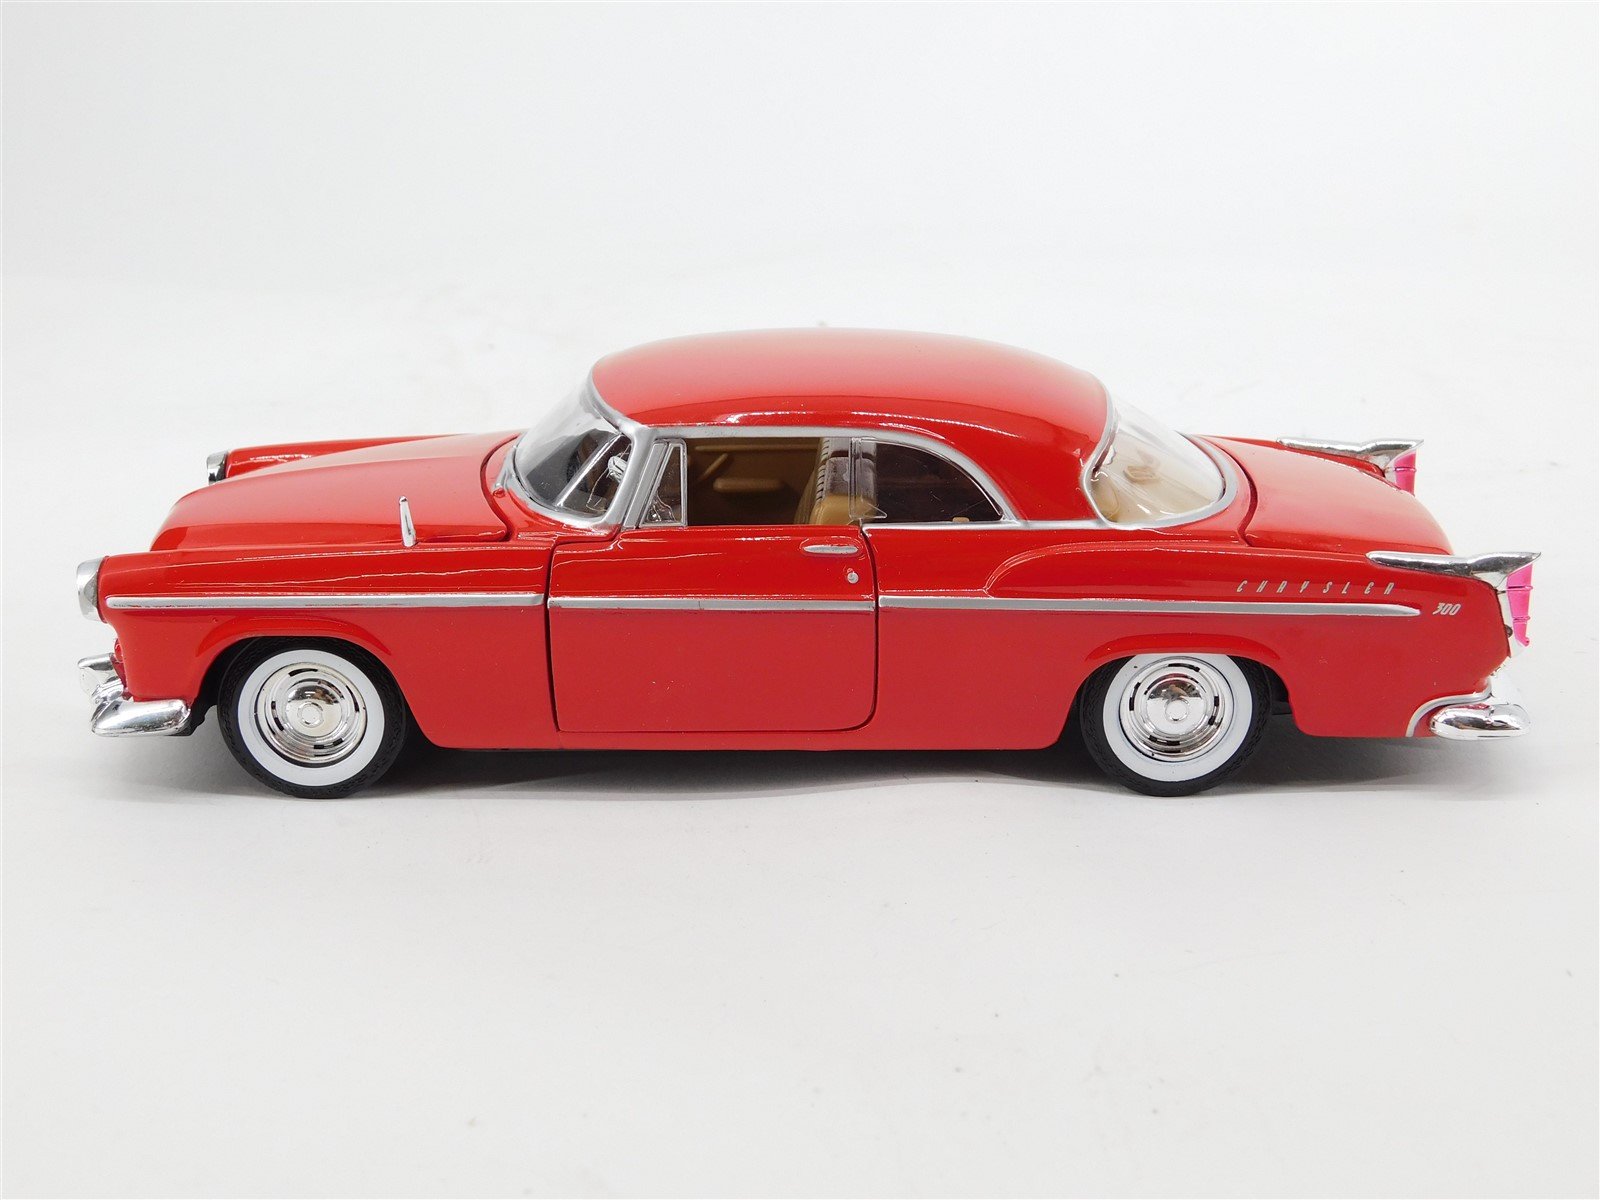 1:24 Scale Motor Max #73302 Die-Cast Automobile 1955 Chrysler C300 - Red